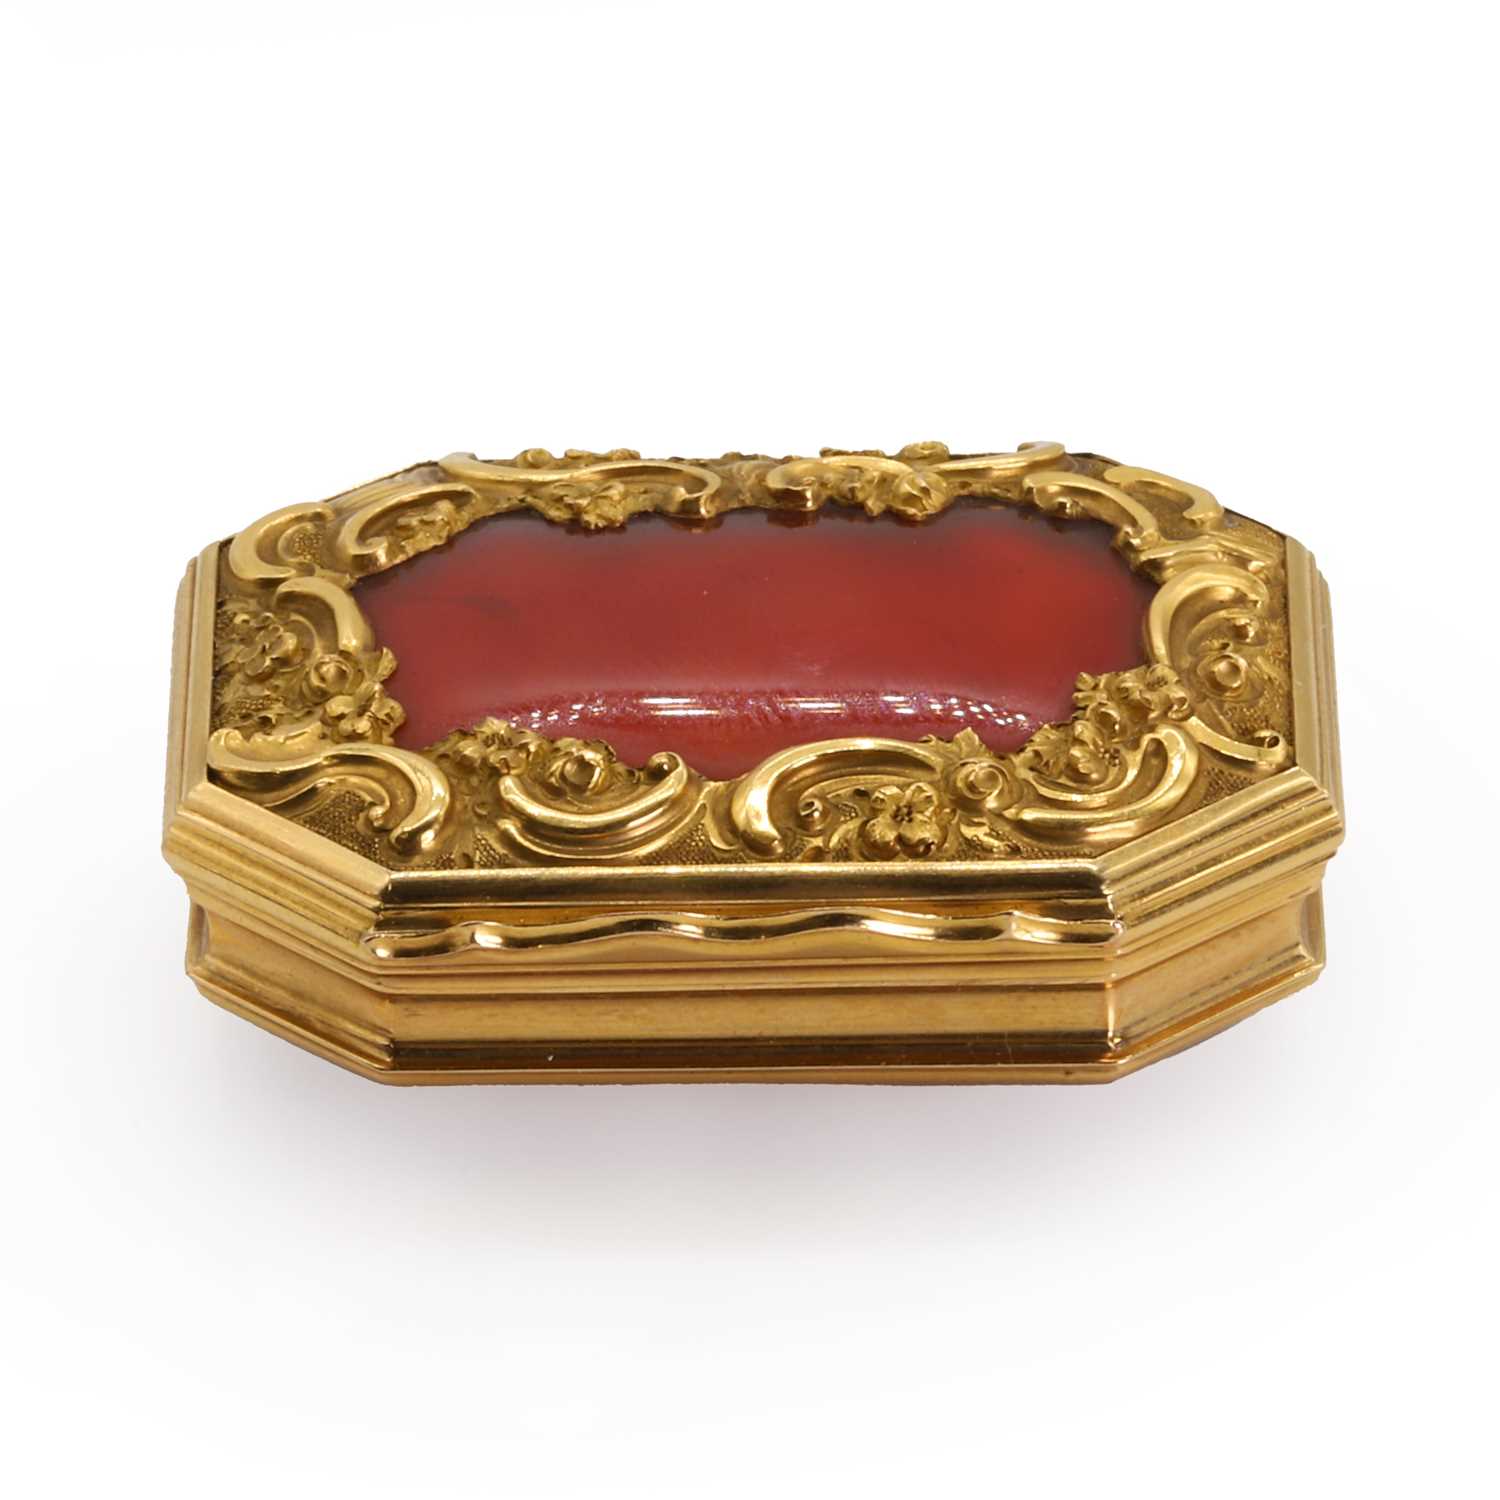 A gold mounted hardstone snuffbox,